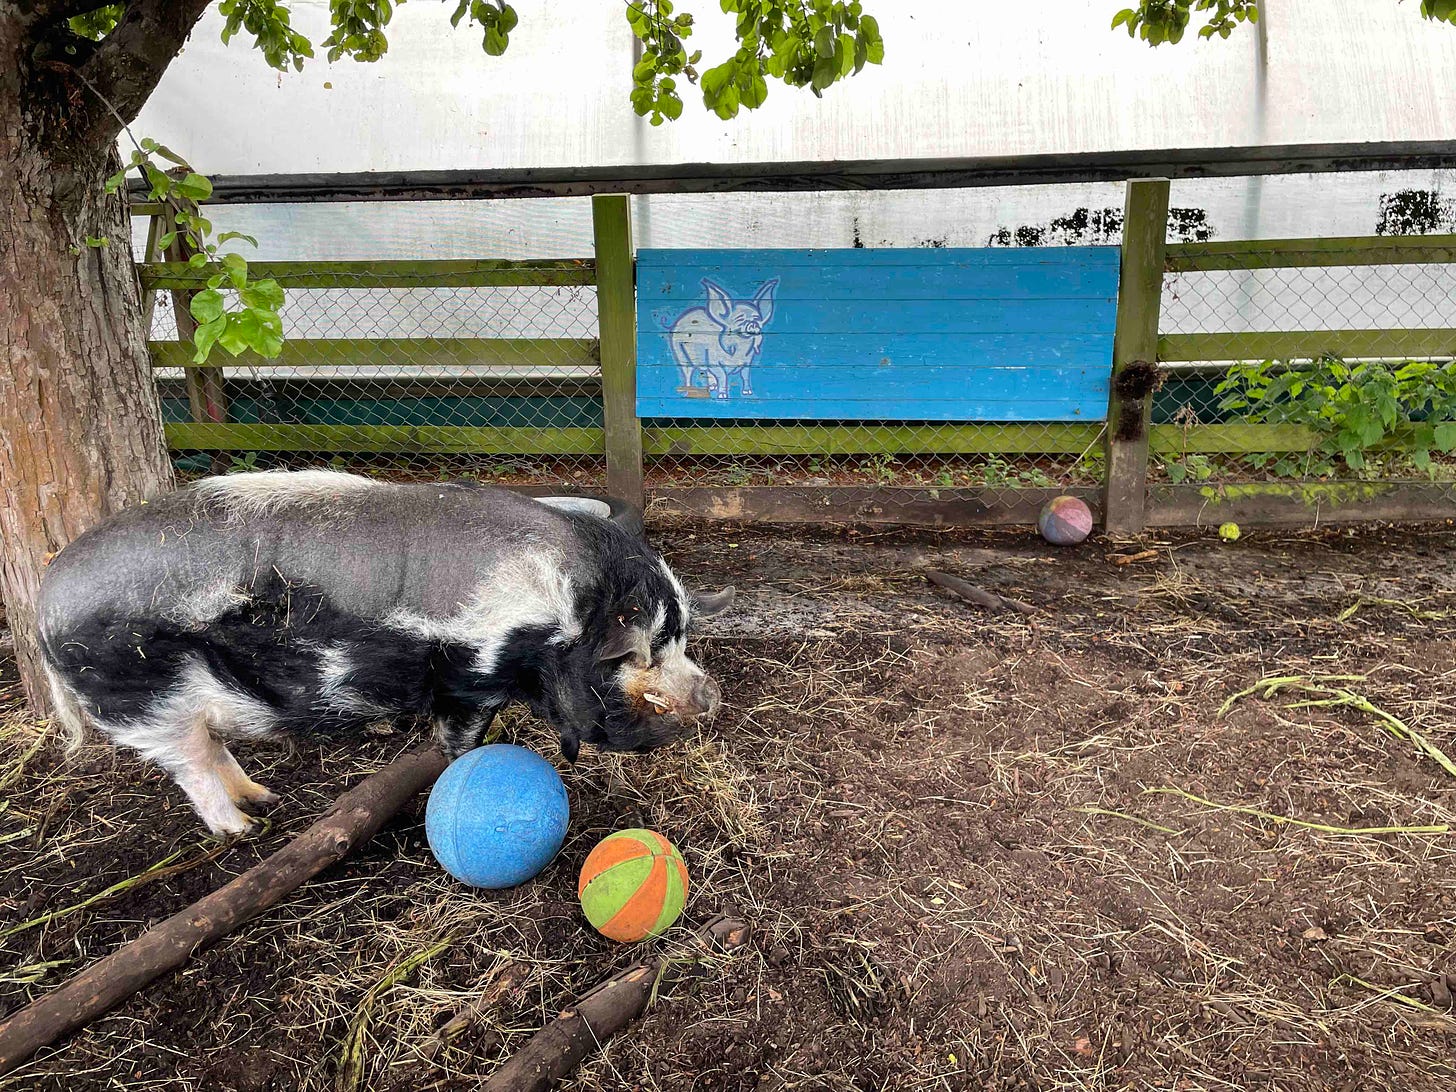 Colour photo of Holmes the pig at Spitalfields City Farm in his pen and with three balls near him, there's a blue-painted sign in the background with a white pig painted on it